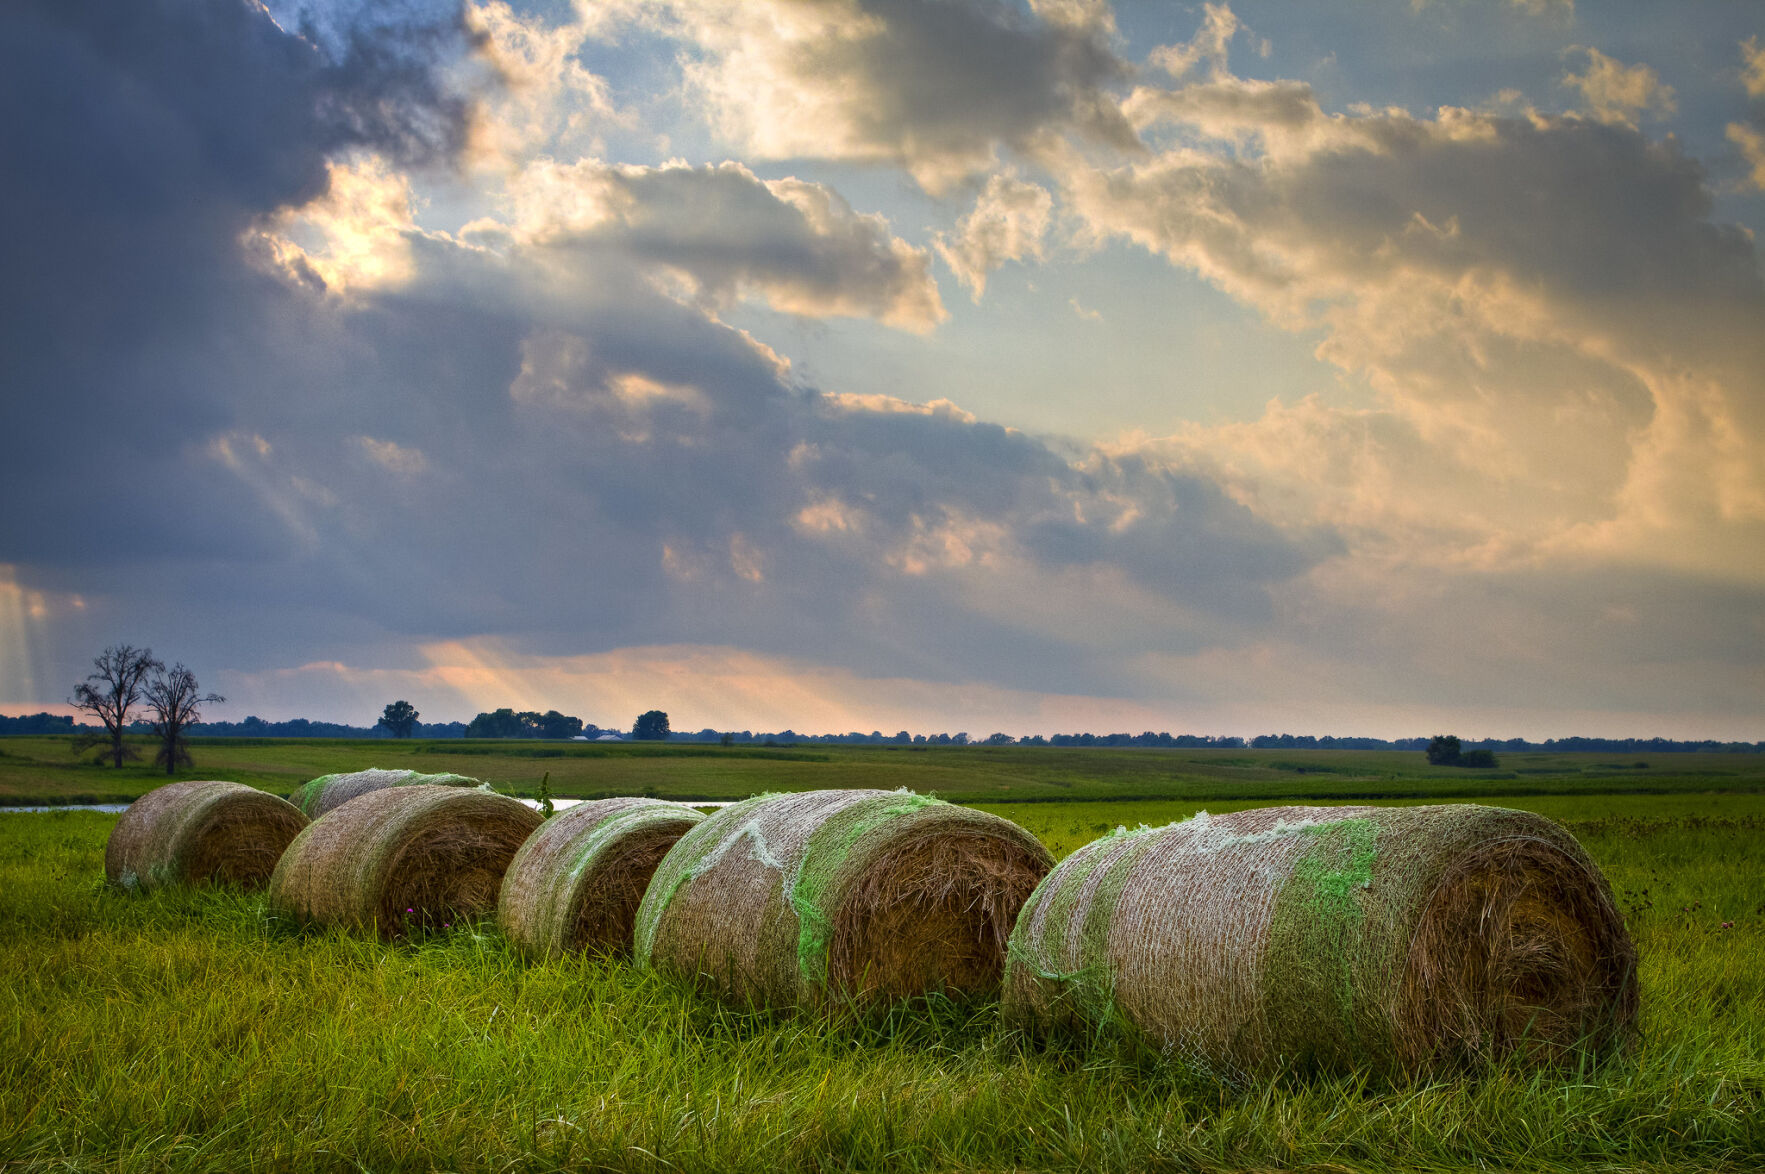 Producers can reduce hay loss with proper storage, says University of Missouri Extension specialist Charles Ellis. (Photo courtesy of Kyle Spradley, MU College of Agriculture, Food and Natural Resources.)